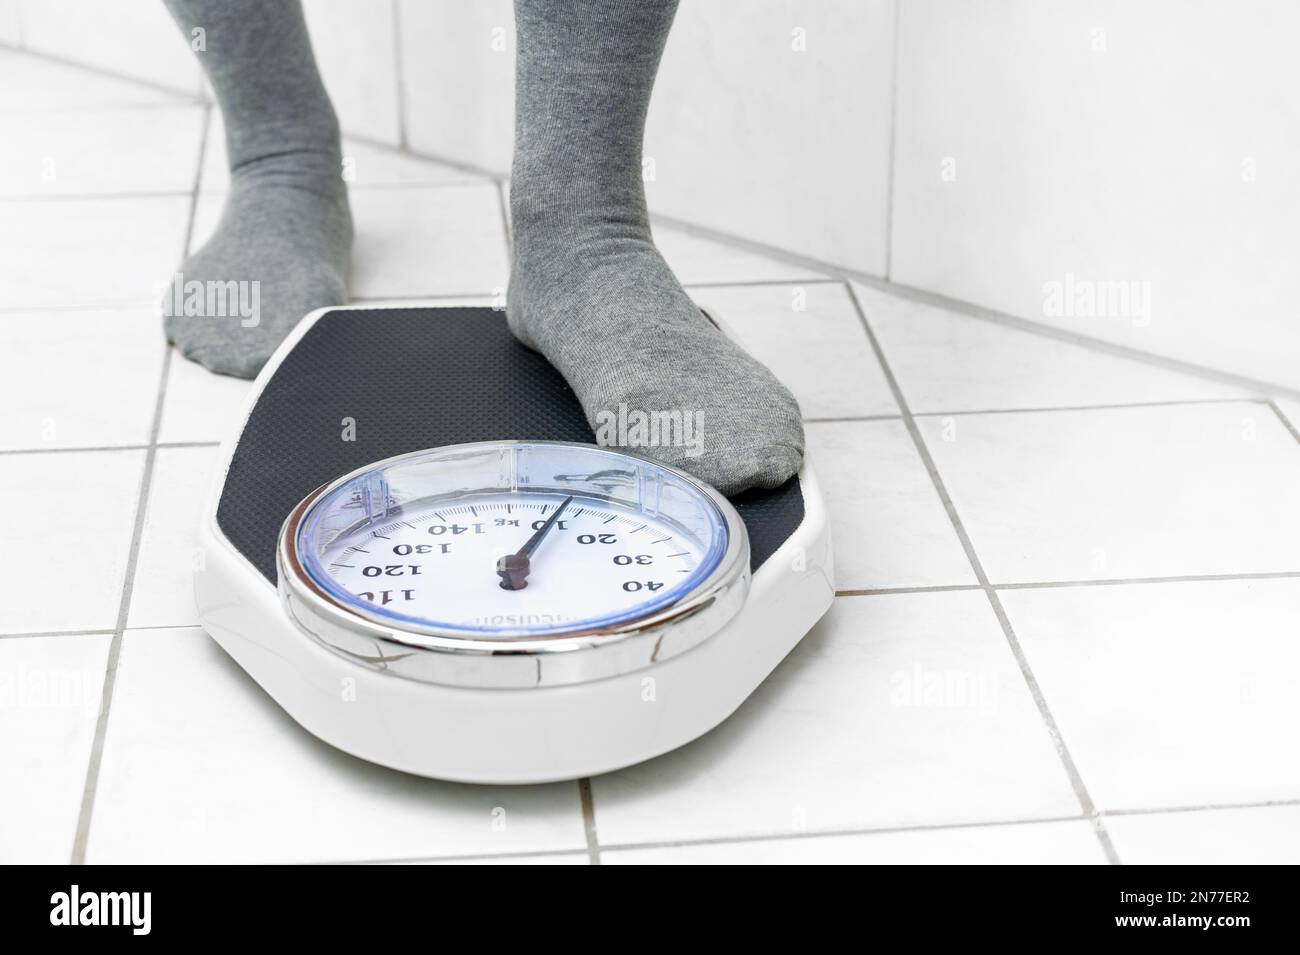 https://c8.alamy.com/comp/2N77ER2/feet-in-socks-stepping-on-a-personal-scale-on-the-tiled-bathroom-floor-to-measure-the-body-weight-copy-space-selected-focus-2N77ER2.jpg